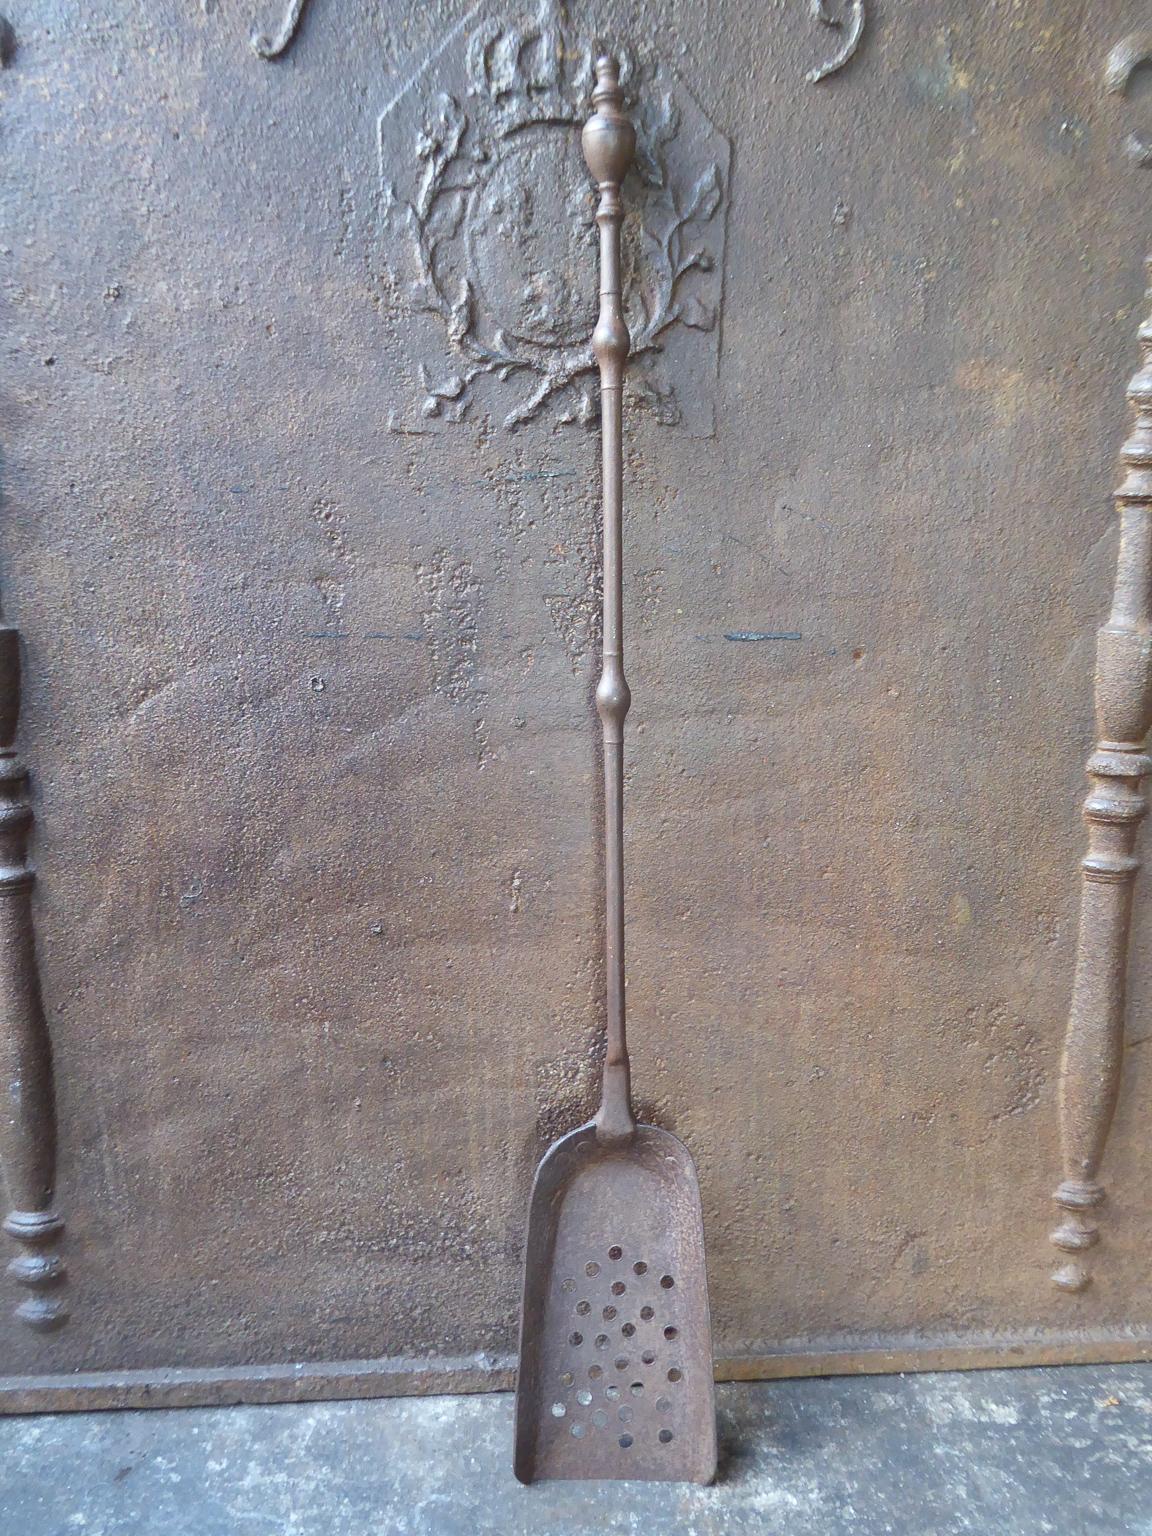 Large 18th century French fireplace shovel made of wrought iron.